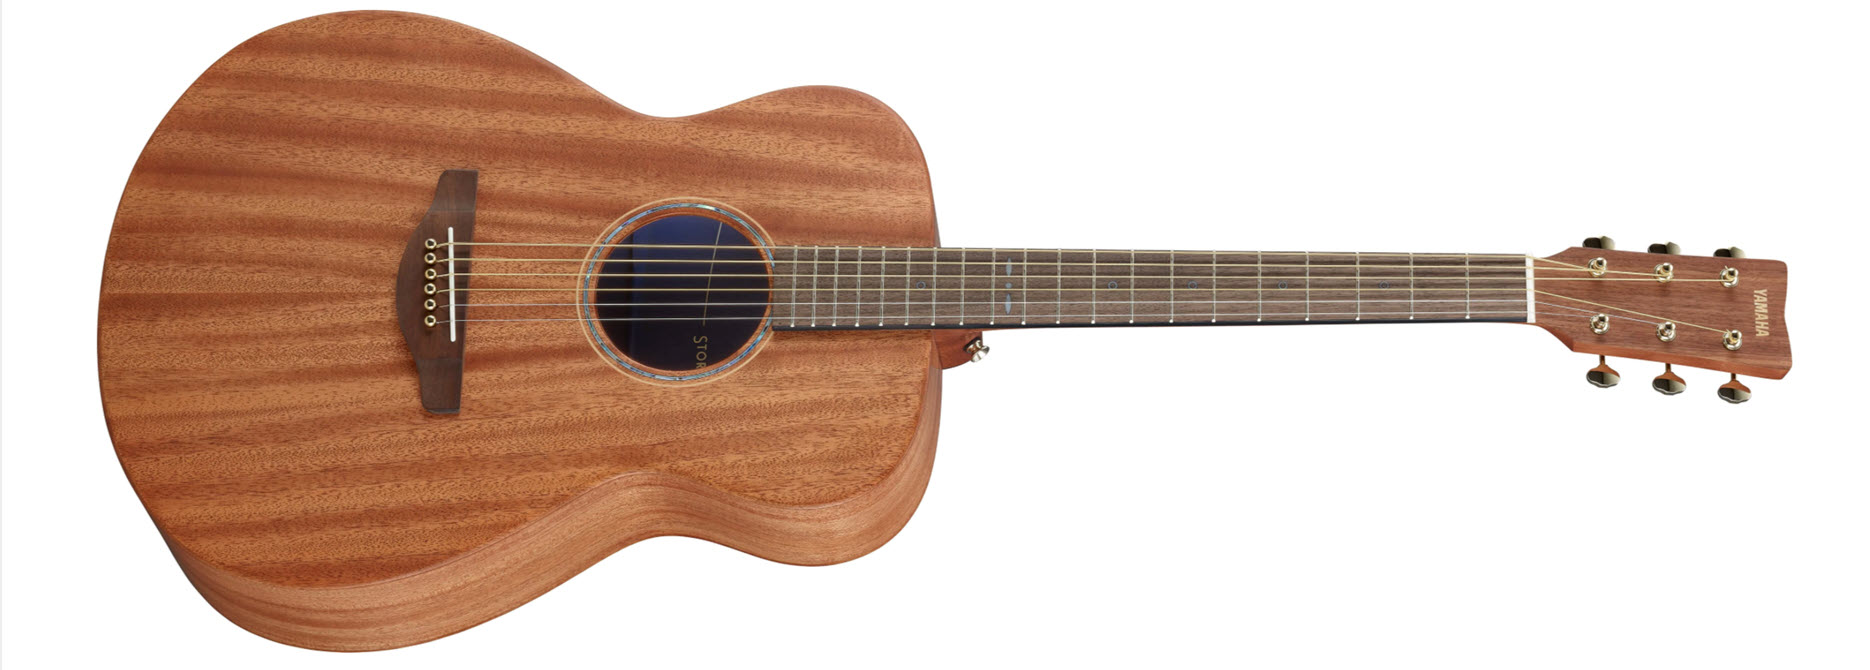 Beautifully wood-grained acoustic guitar.